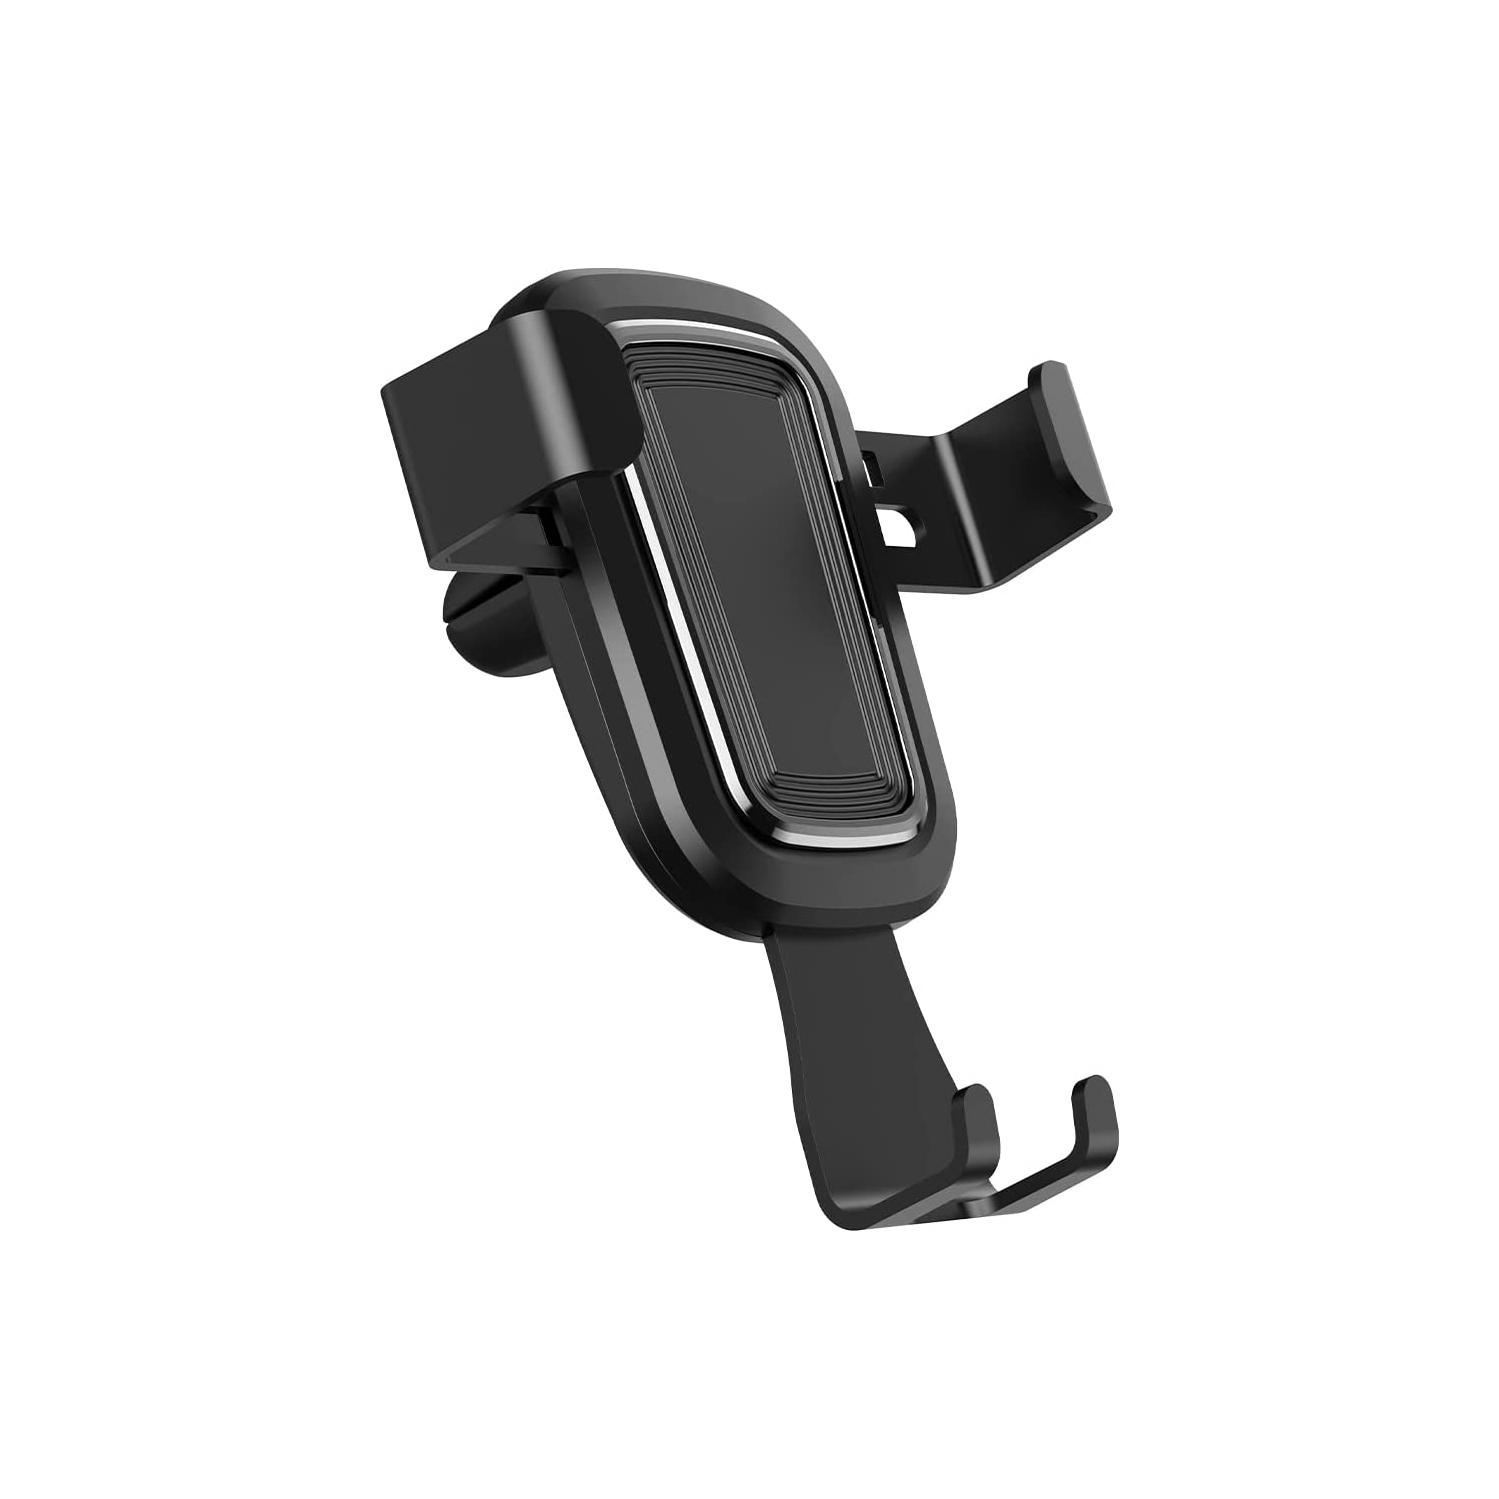 Car Phone Mount Air Vent Cell Phone Holder Adjustable Car Cradle Universal for Cellphones Easy Installation Auto Lock Compatible with iPhone Samsung Huawei All Smartphones